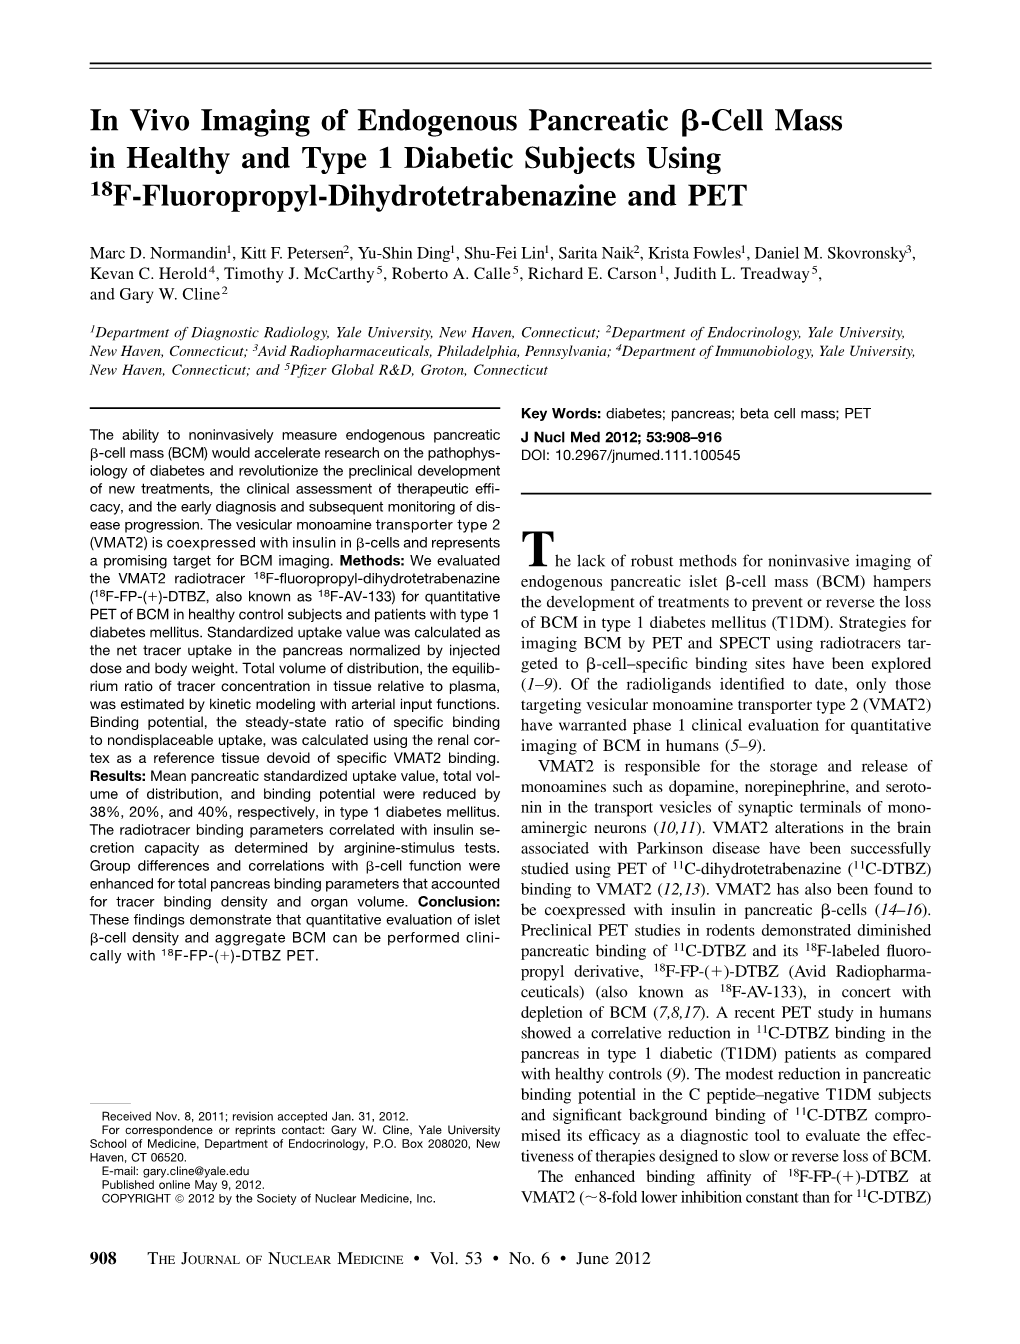 In Vivo Imaging of Endogenous Pancreatic B-Cell Mass in Healthy and Type 1 Diabetic Subjects Using 18F-Fluoropropyl-Dihydrotetrabenazine and PET